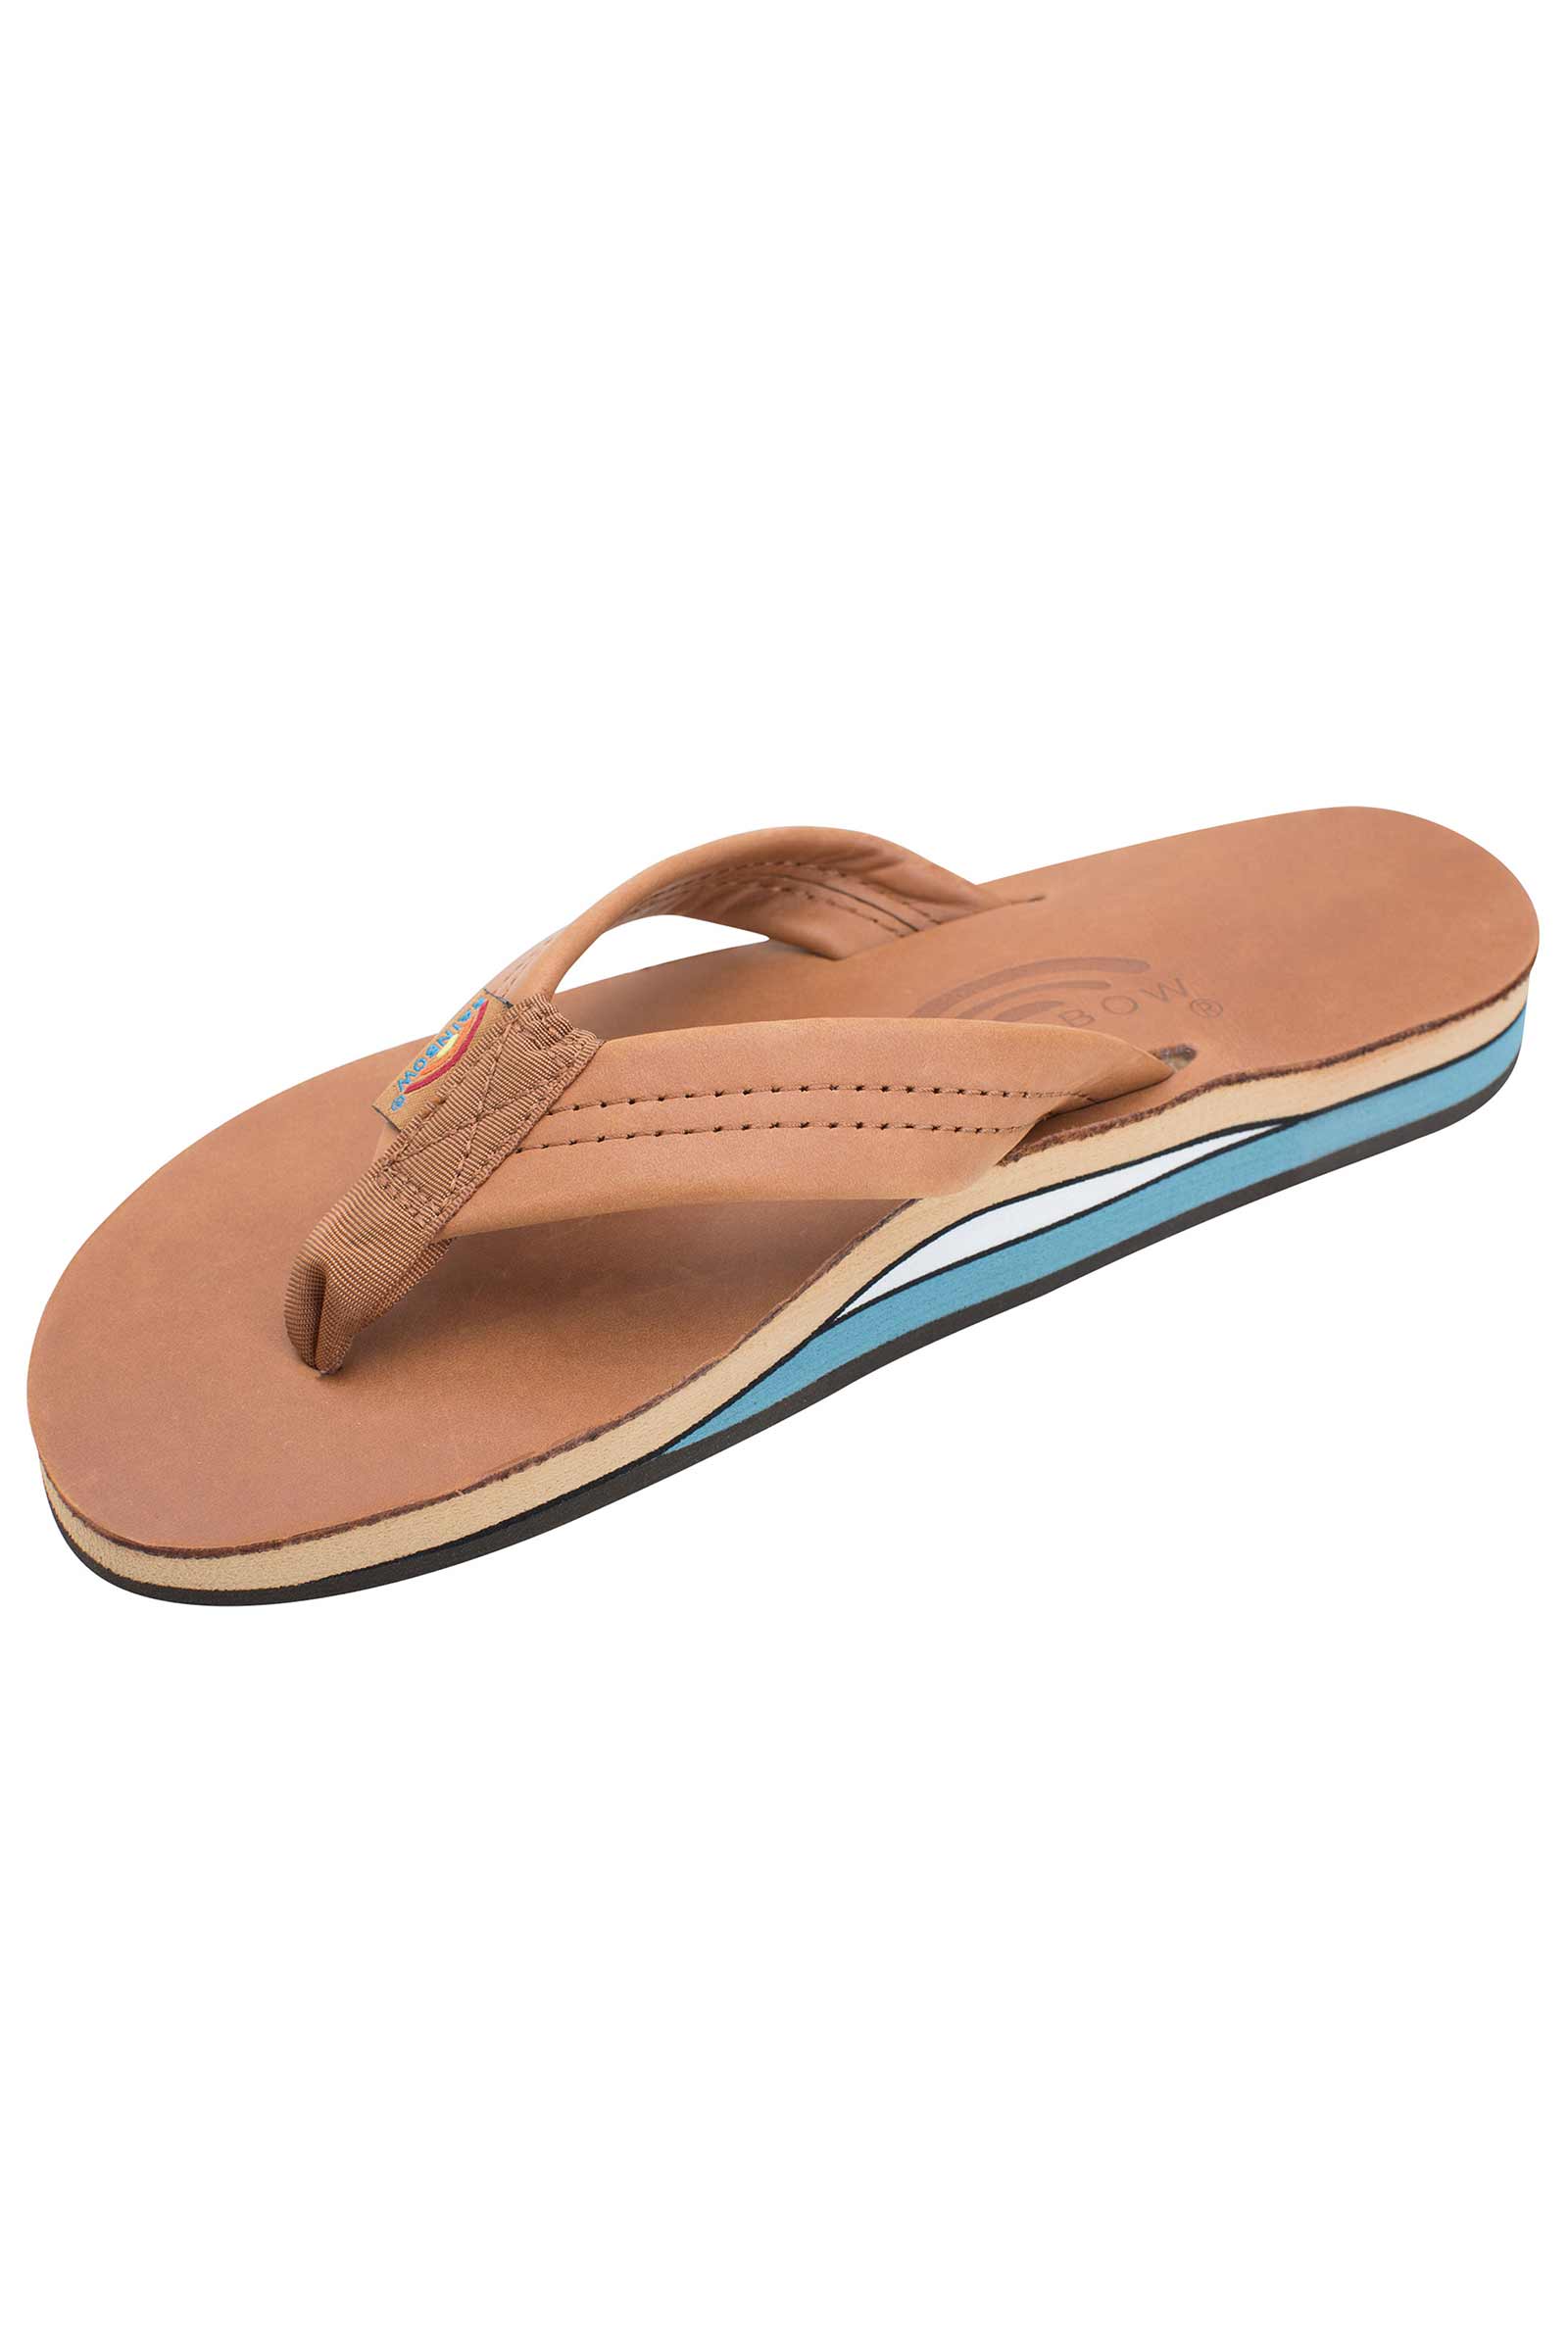 Womens Rainbow Sandals Classic Double Tan & Blue - Hope Outfitters